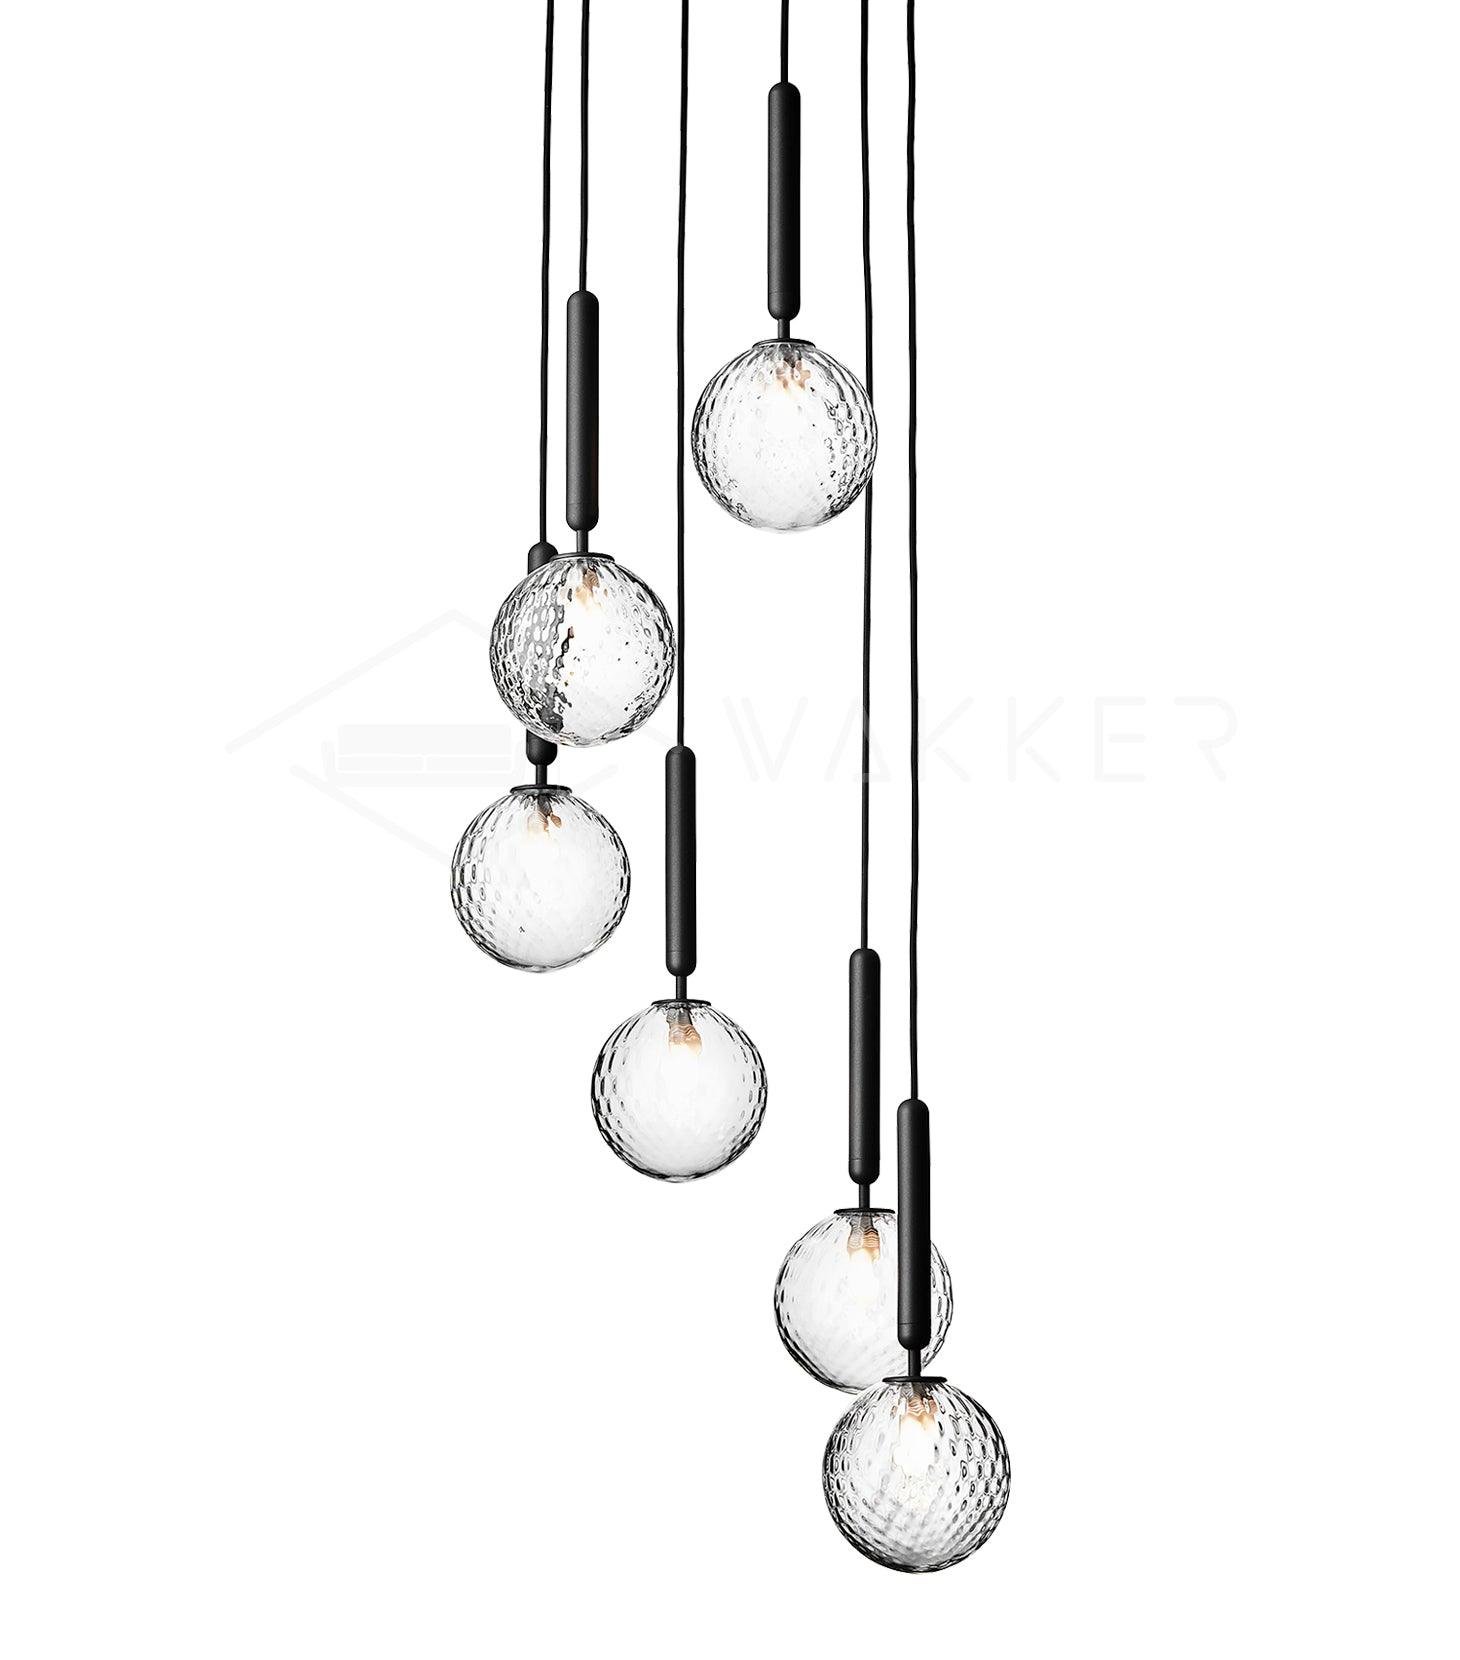 Black Miira Pendant Light with 6 Heads, measuring 11.8" in diameter and 59" in height (30cm x 150cm), featuring a clear design.